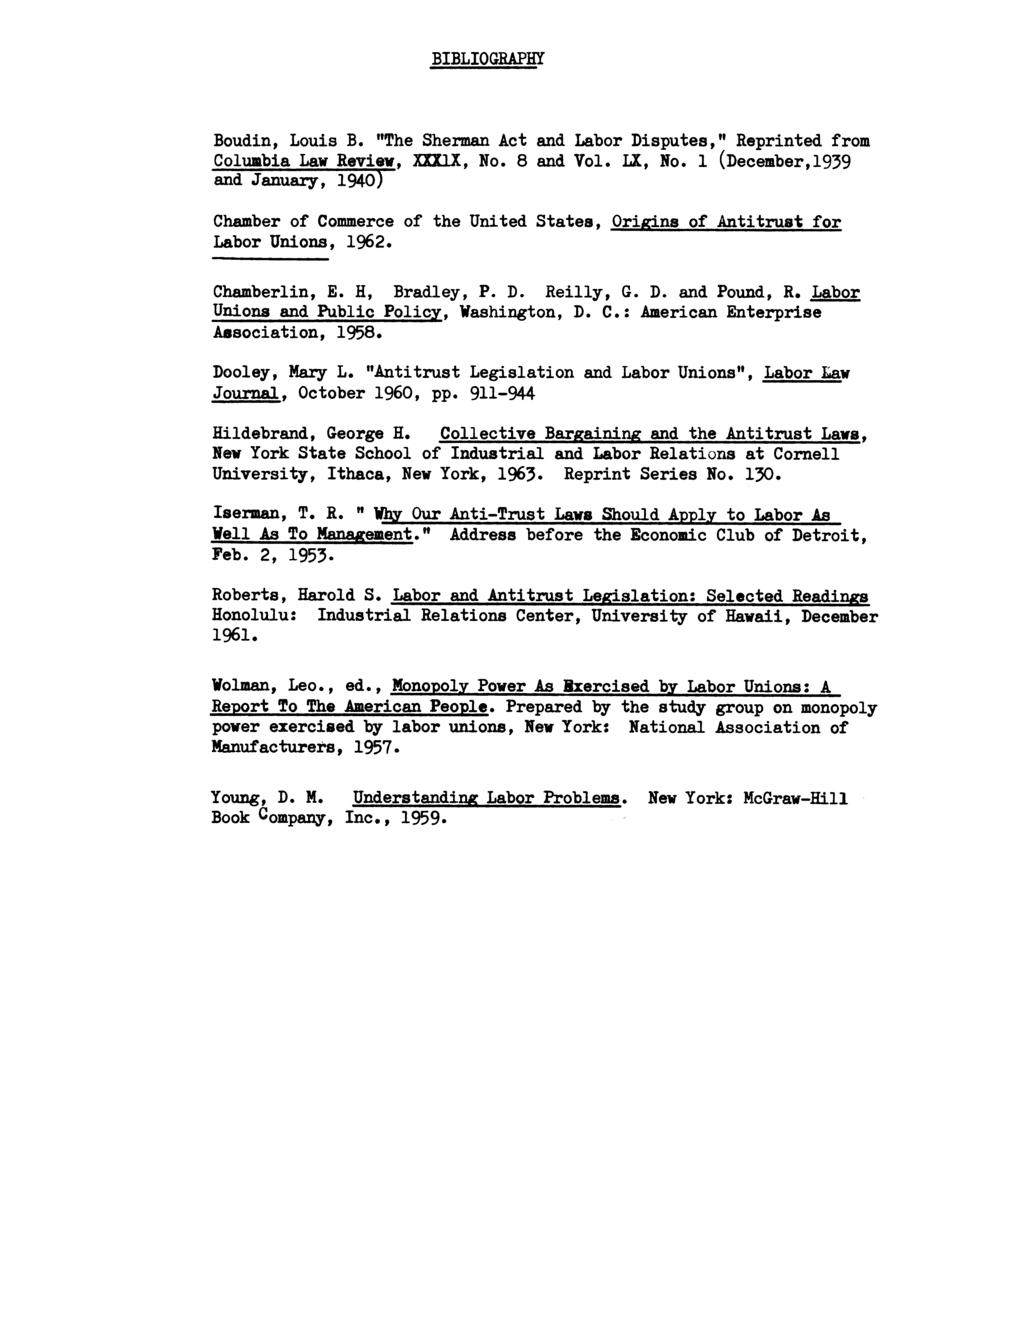 BIBLIOGRAPHY Boudin, Louis B. "The Sherman Act and Labor Disputes," Reprinted from Columbia Law Review, XXXiX, No. 8 and Vol. LX, No.